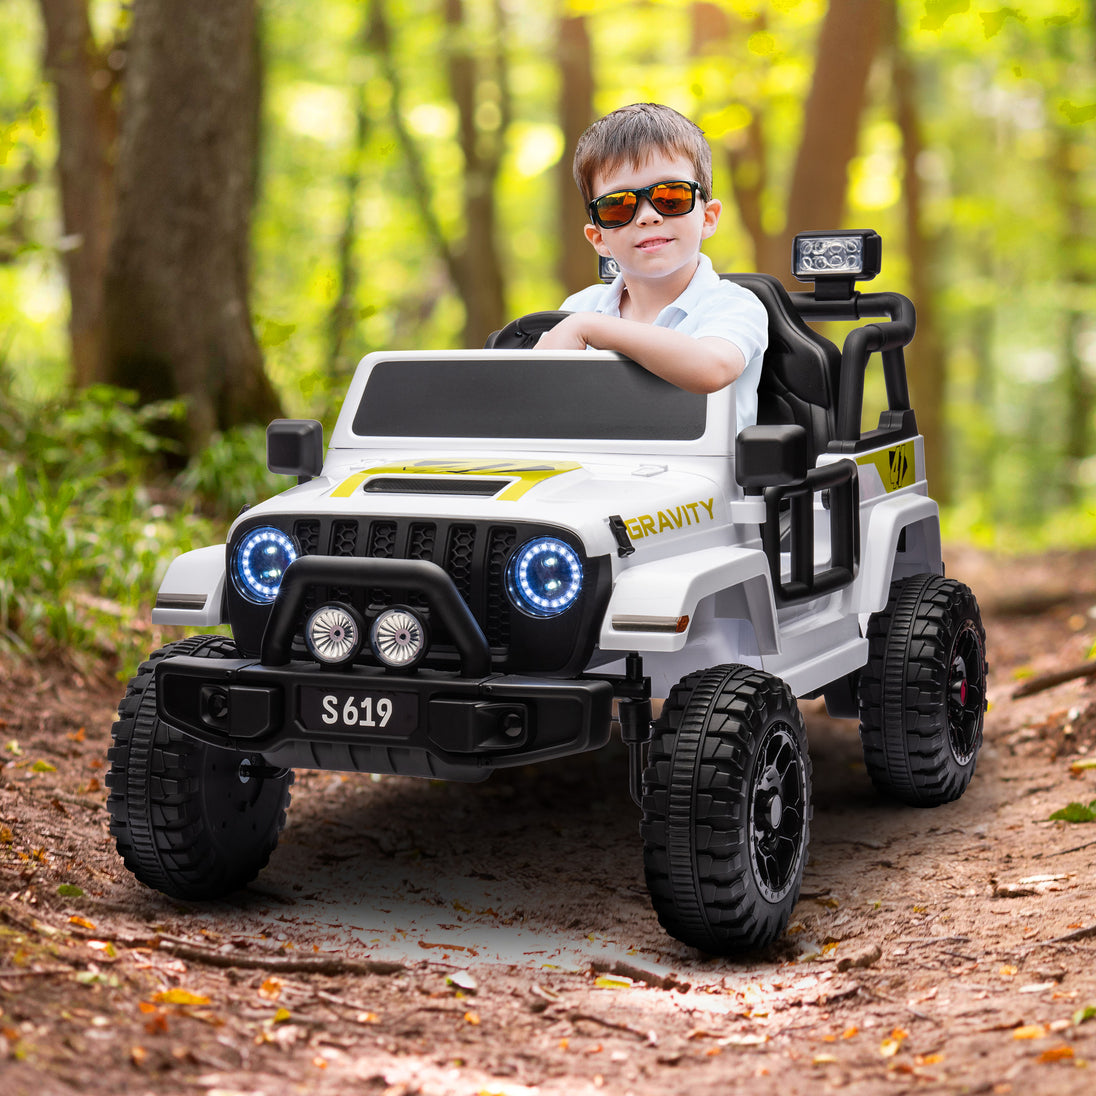 Kahuna S619 Gravity Kids Electric Ride On Car - White - Shoppers Haven  - Baby & Kids > Ride on Cars, Go-karts & Bikes     